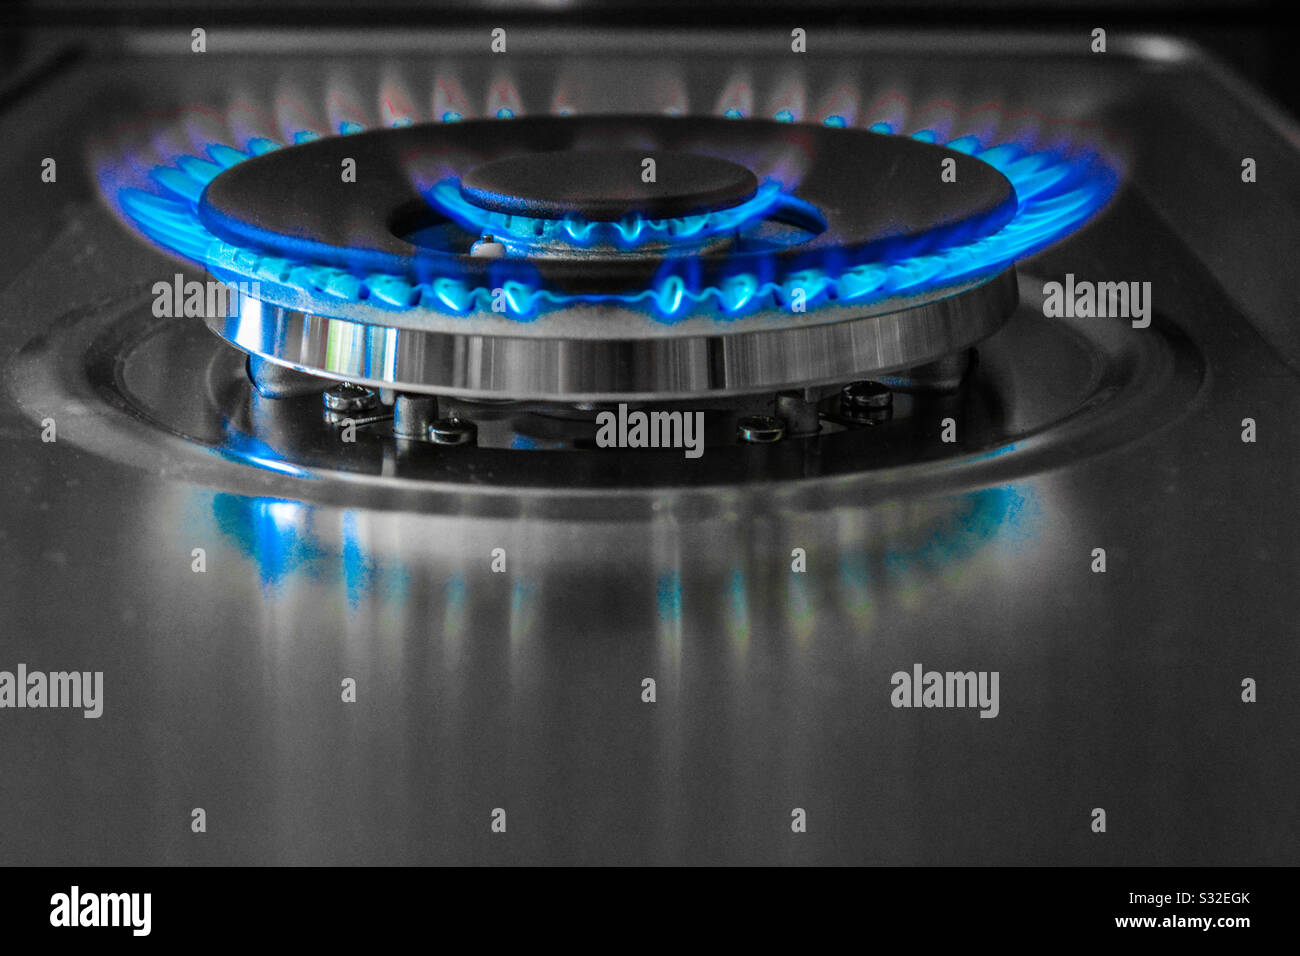 Gas stove burner with blue flame, pop color Stock Photo